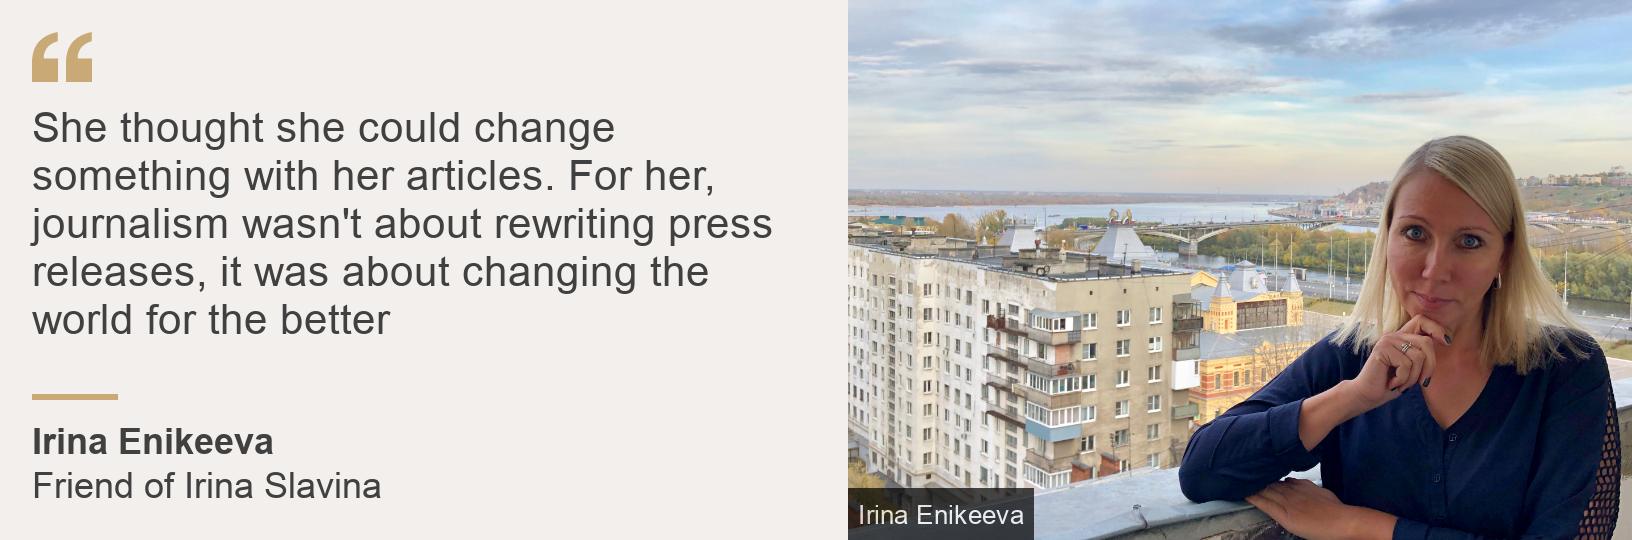 &quot;She thought she could change something with her articles. For her, journalism wasn&#39;t about rewriting press releases, it was about changing the world for the better&quot;, Source: Irina Enikeeva, Source description: Friend of Irina Slavina, Image: Irina Enikeeva